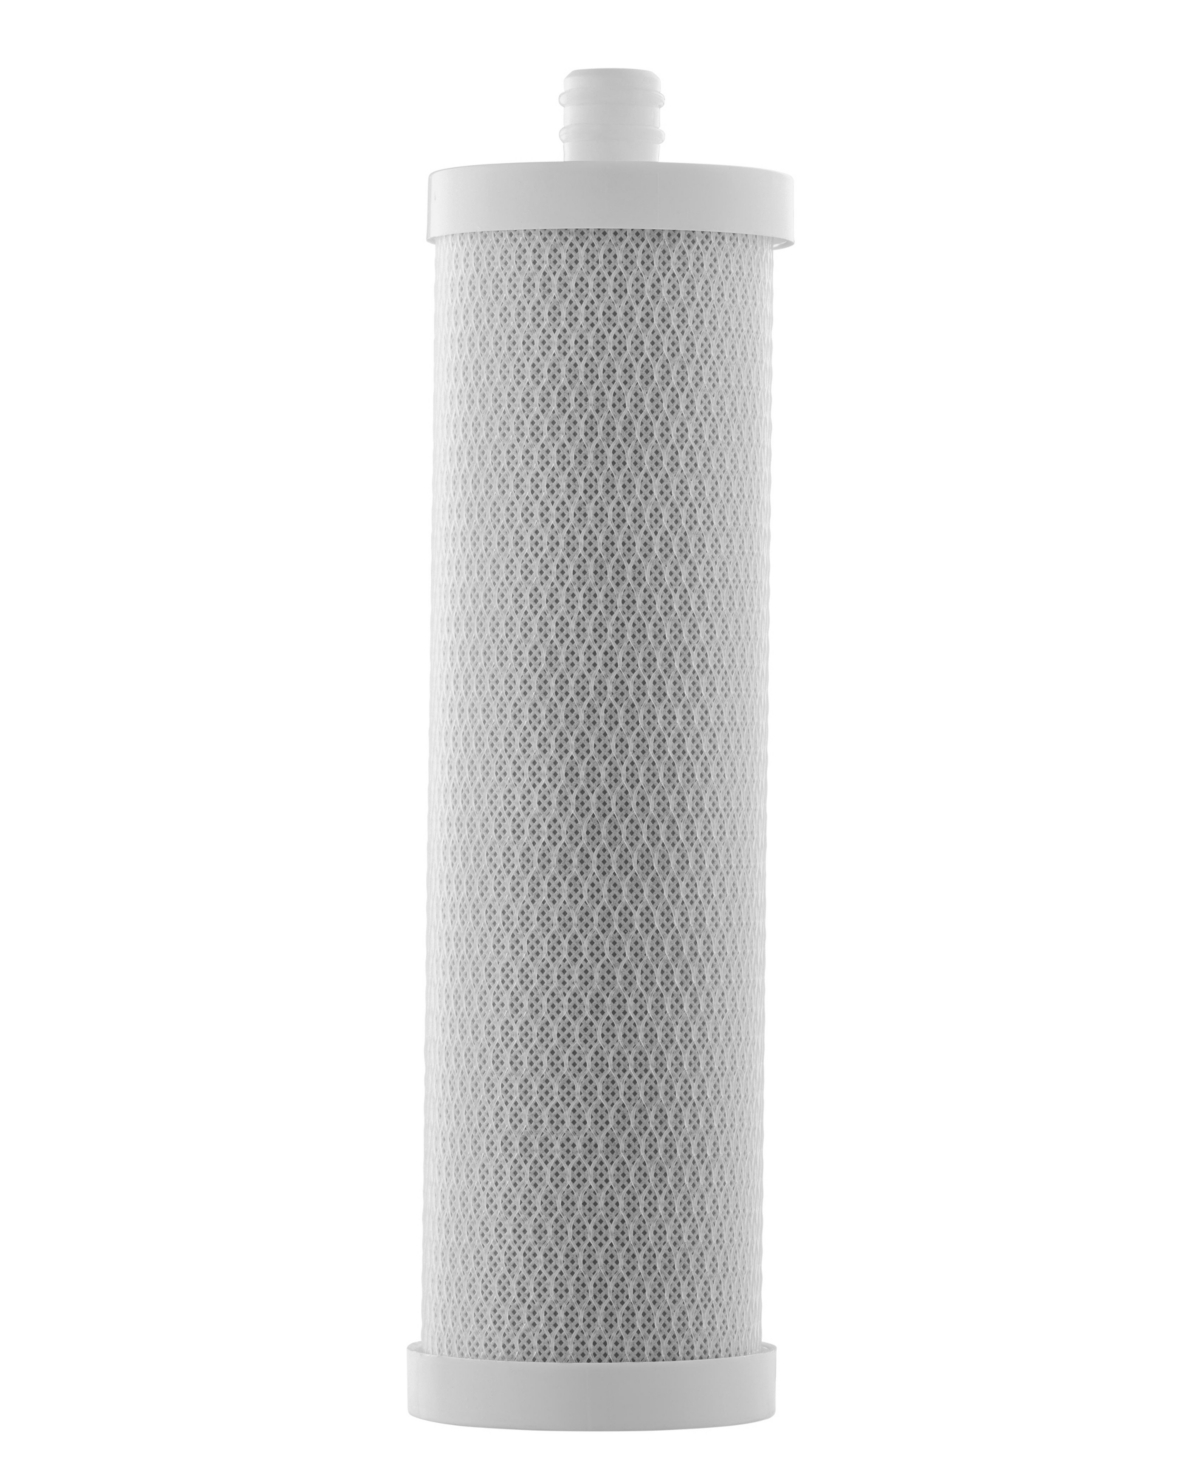 MFC093 Replacement Water Filter for Mist Countertop Filtration System, Compatible with MFS093 and Wd-ctf-01, 1 Pack - White